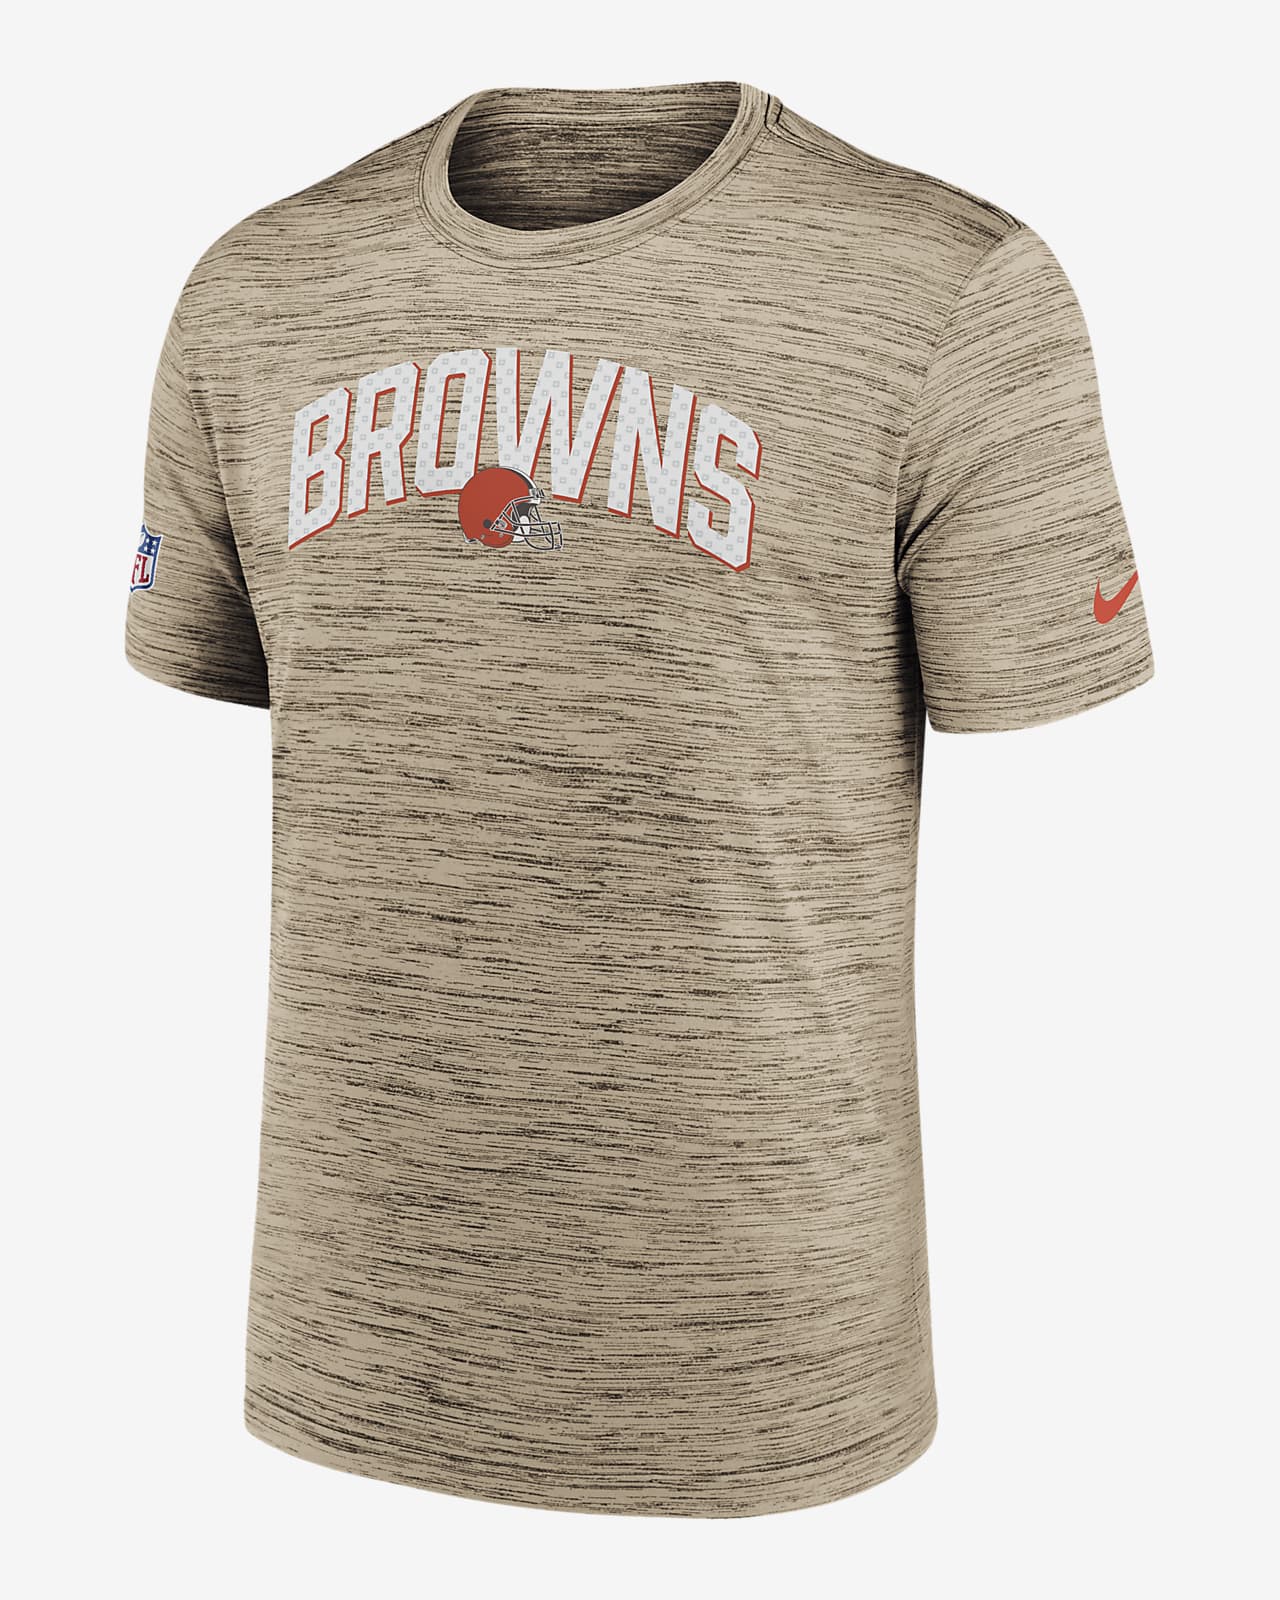 Nike Dri-FIT Velocity Athletic Stack (NFL Cleveland Browns) Men's T-Shirt